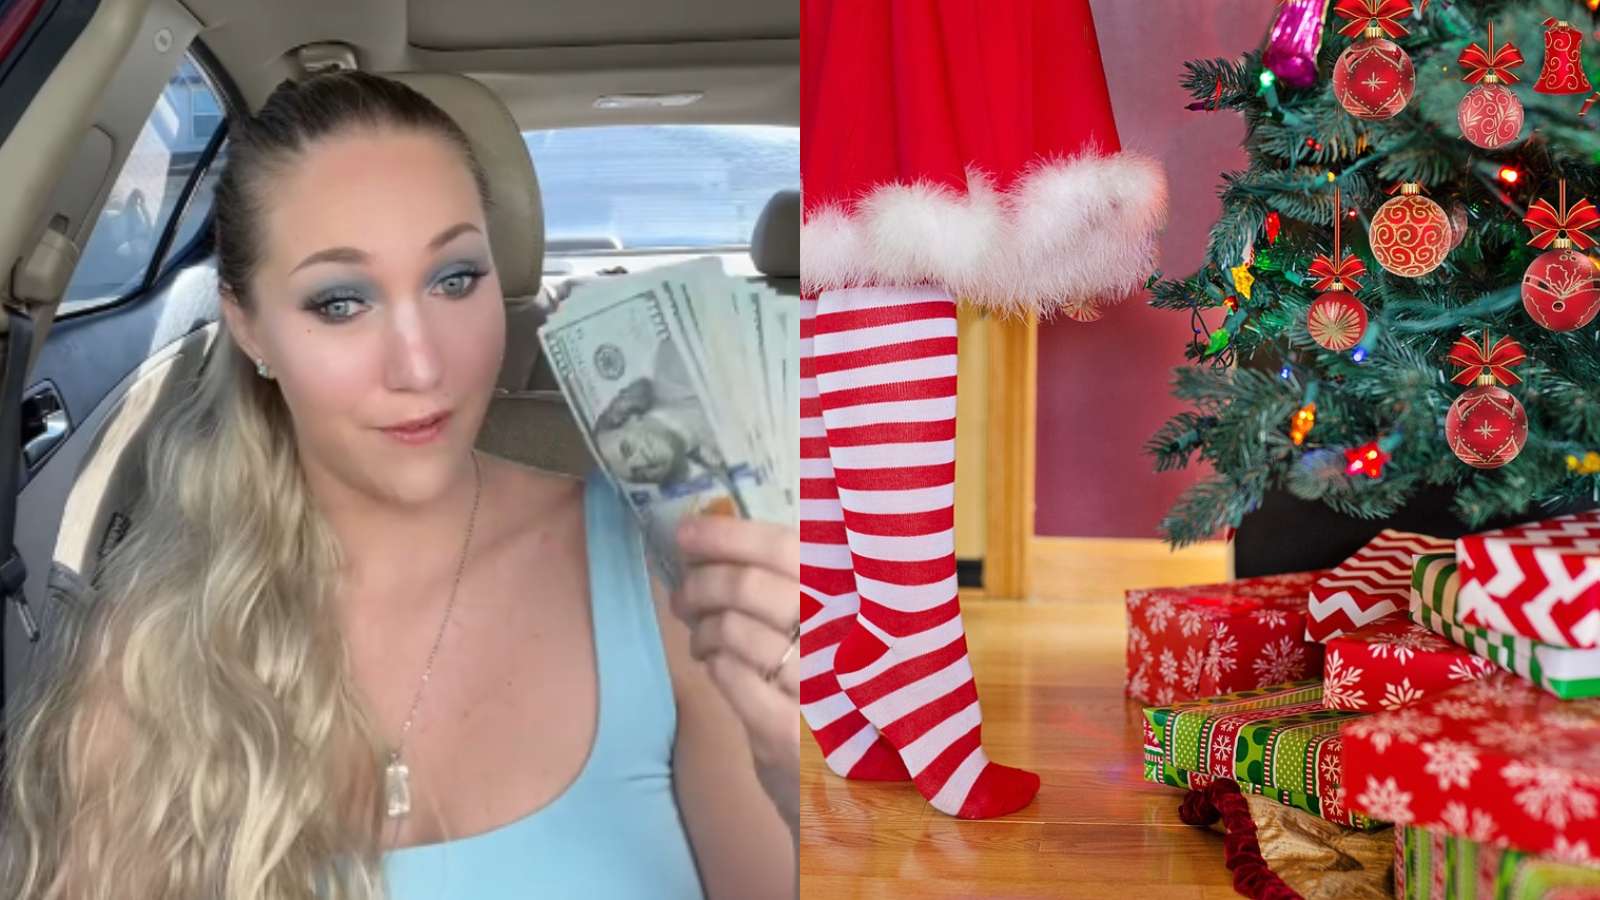 onlyfans model makes thousands decorating christmas trees topless